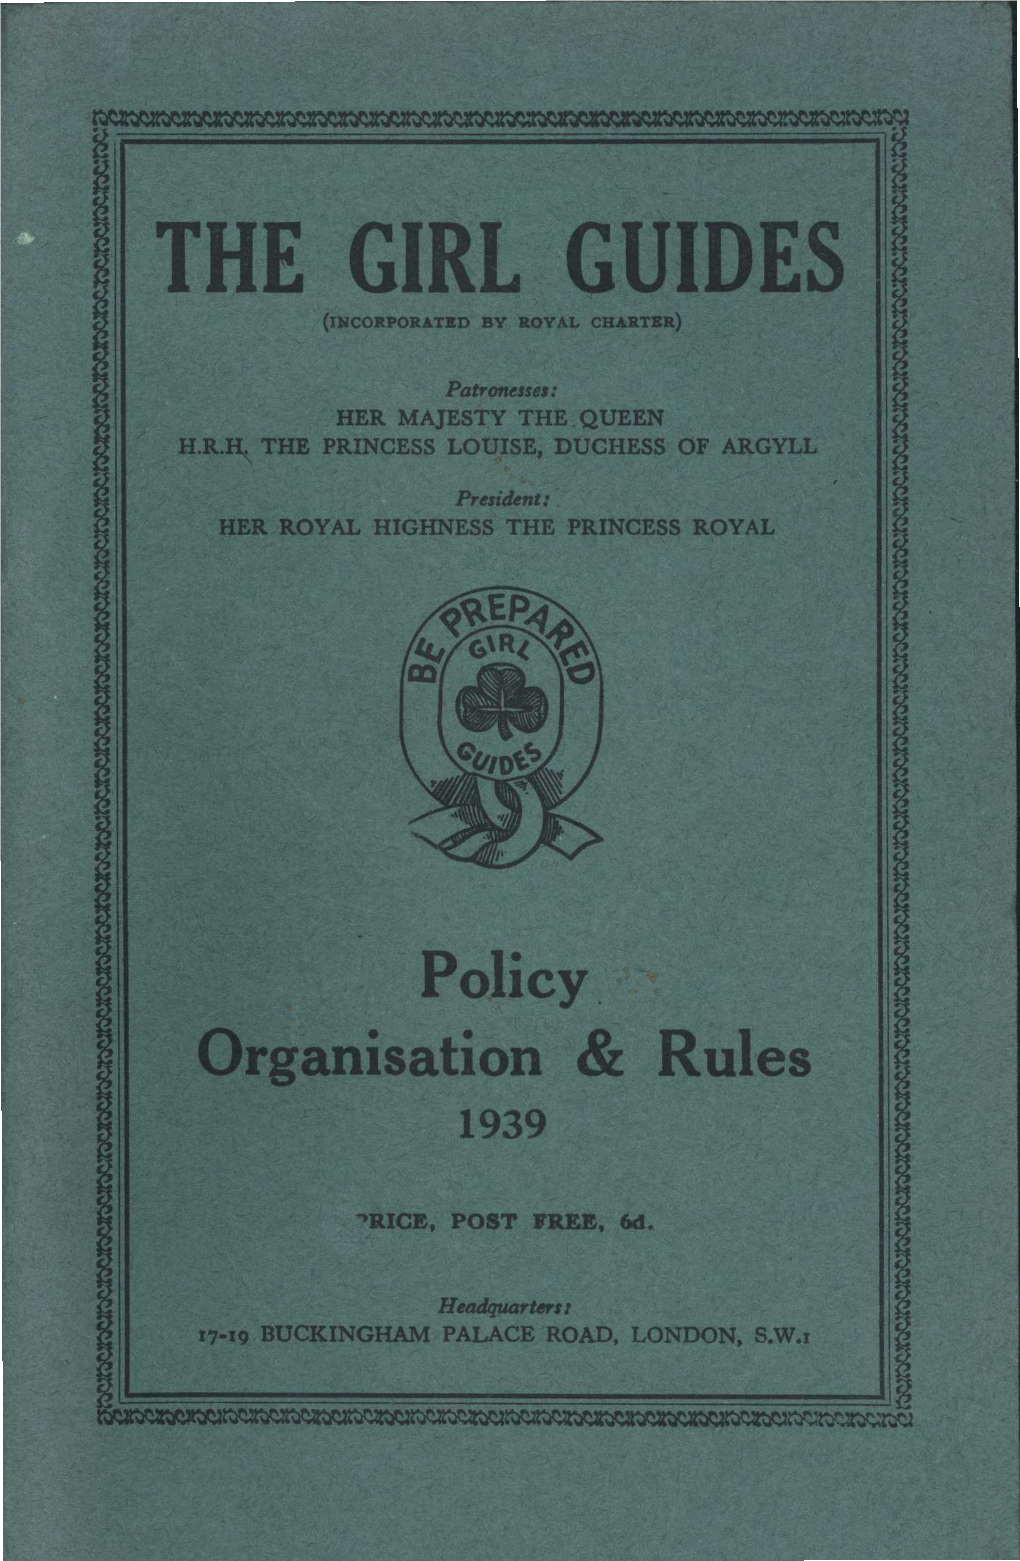 The Girl Guides (Incorporated by Royal Charter)